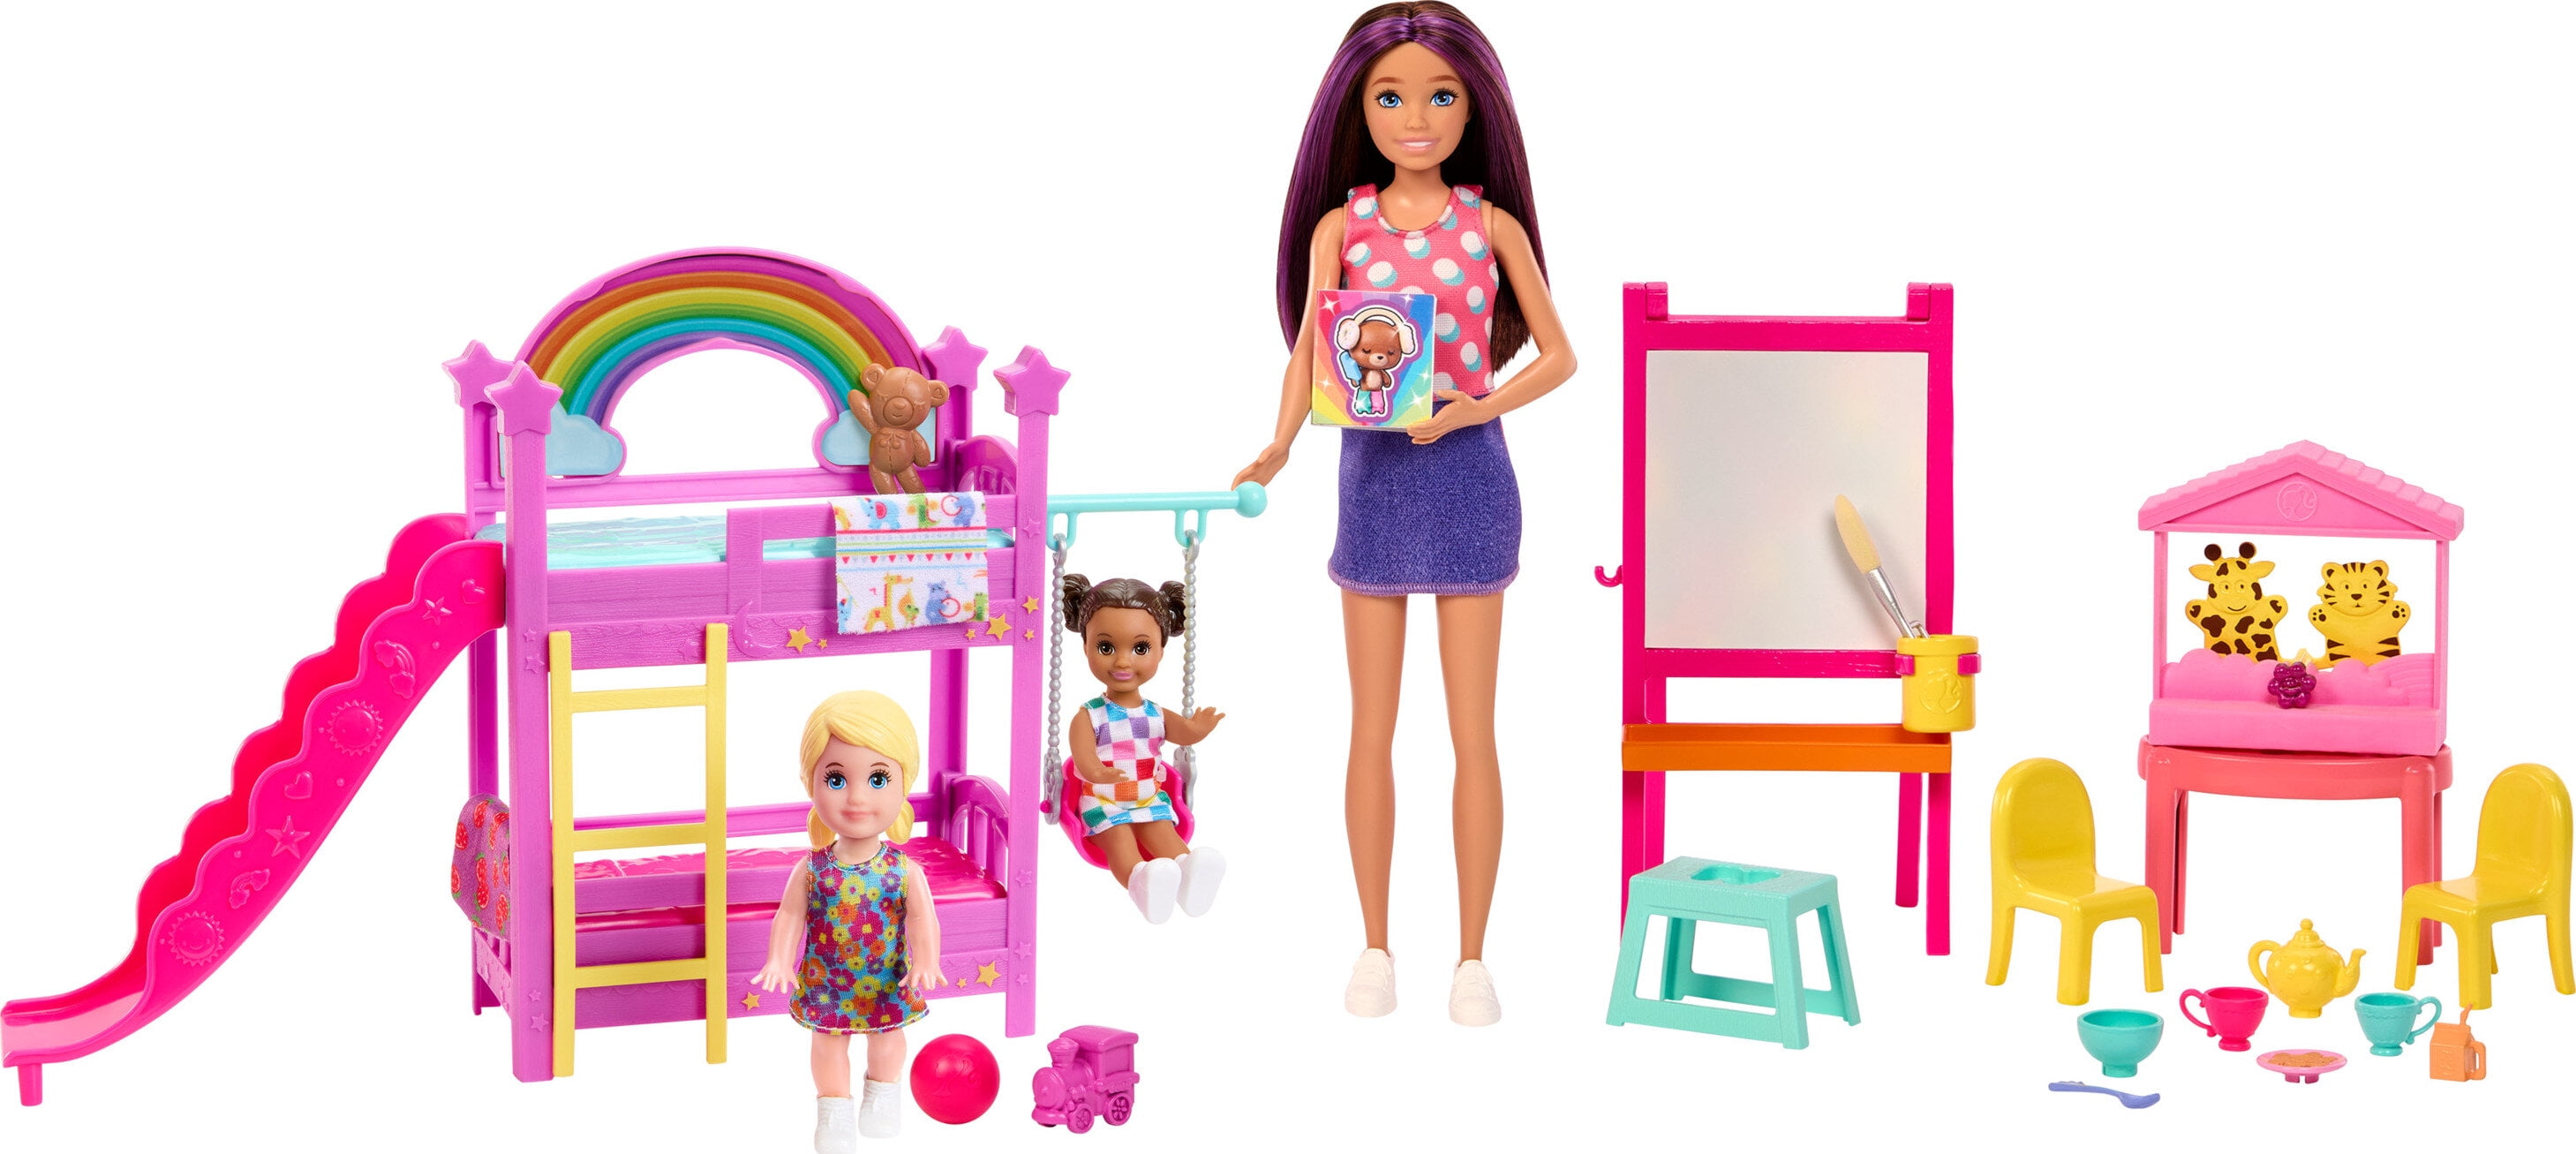 Barbie Skipper Babysitters Inc. Ultimate Daycare Playset with 3 Dolls,  Furniture & 15+ Accessories